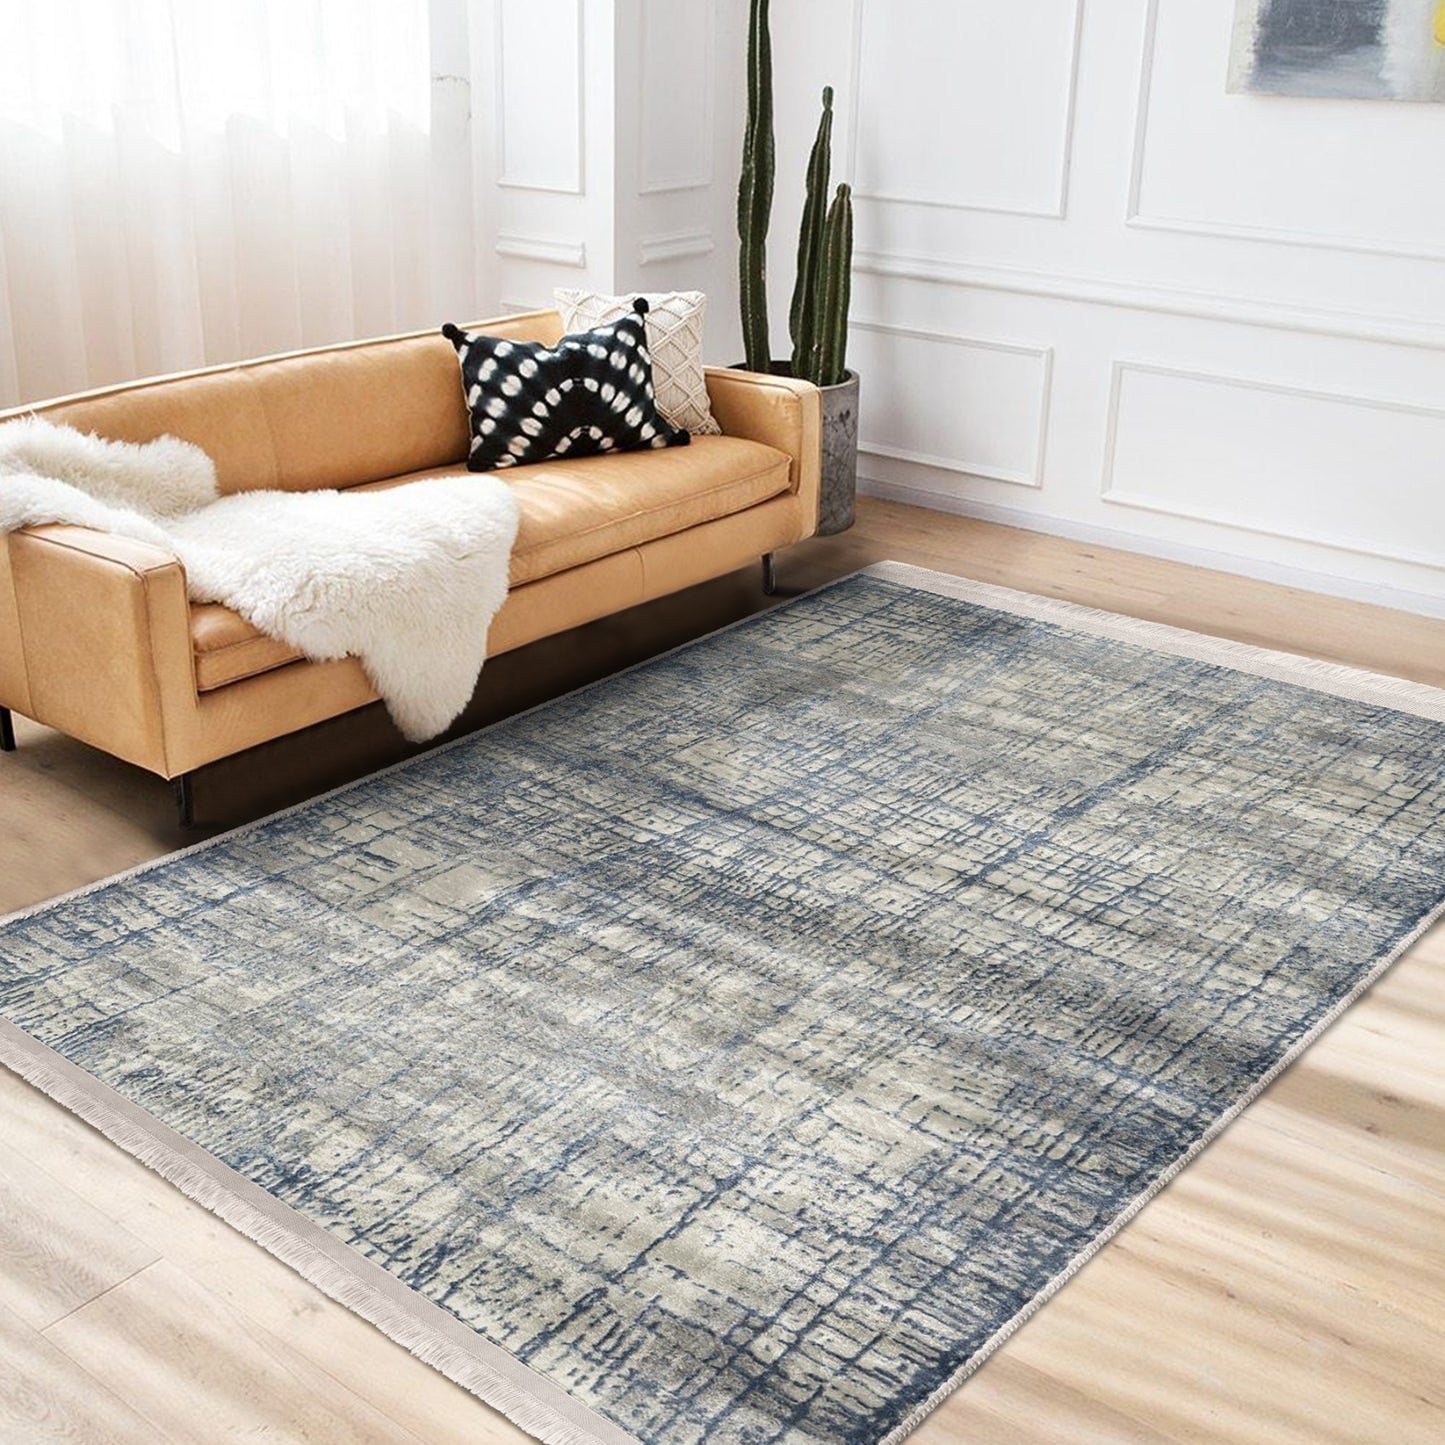 Rustic Harmony Rug for Home Tranquility